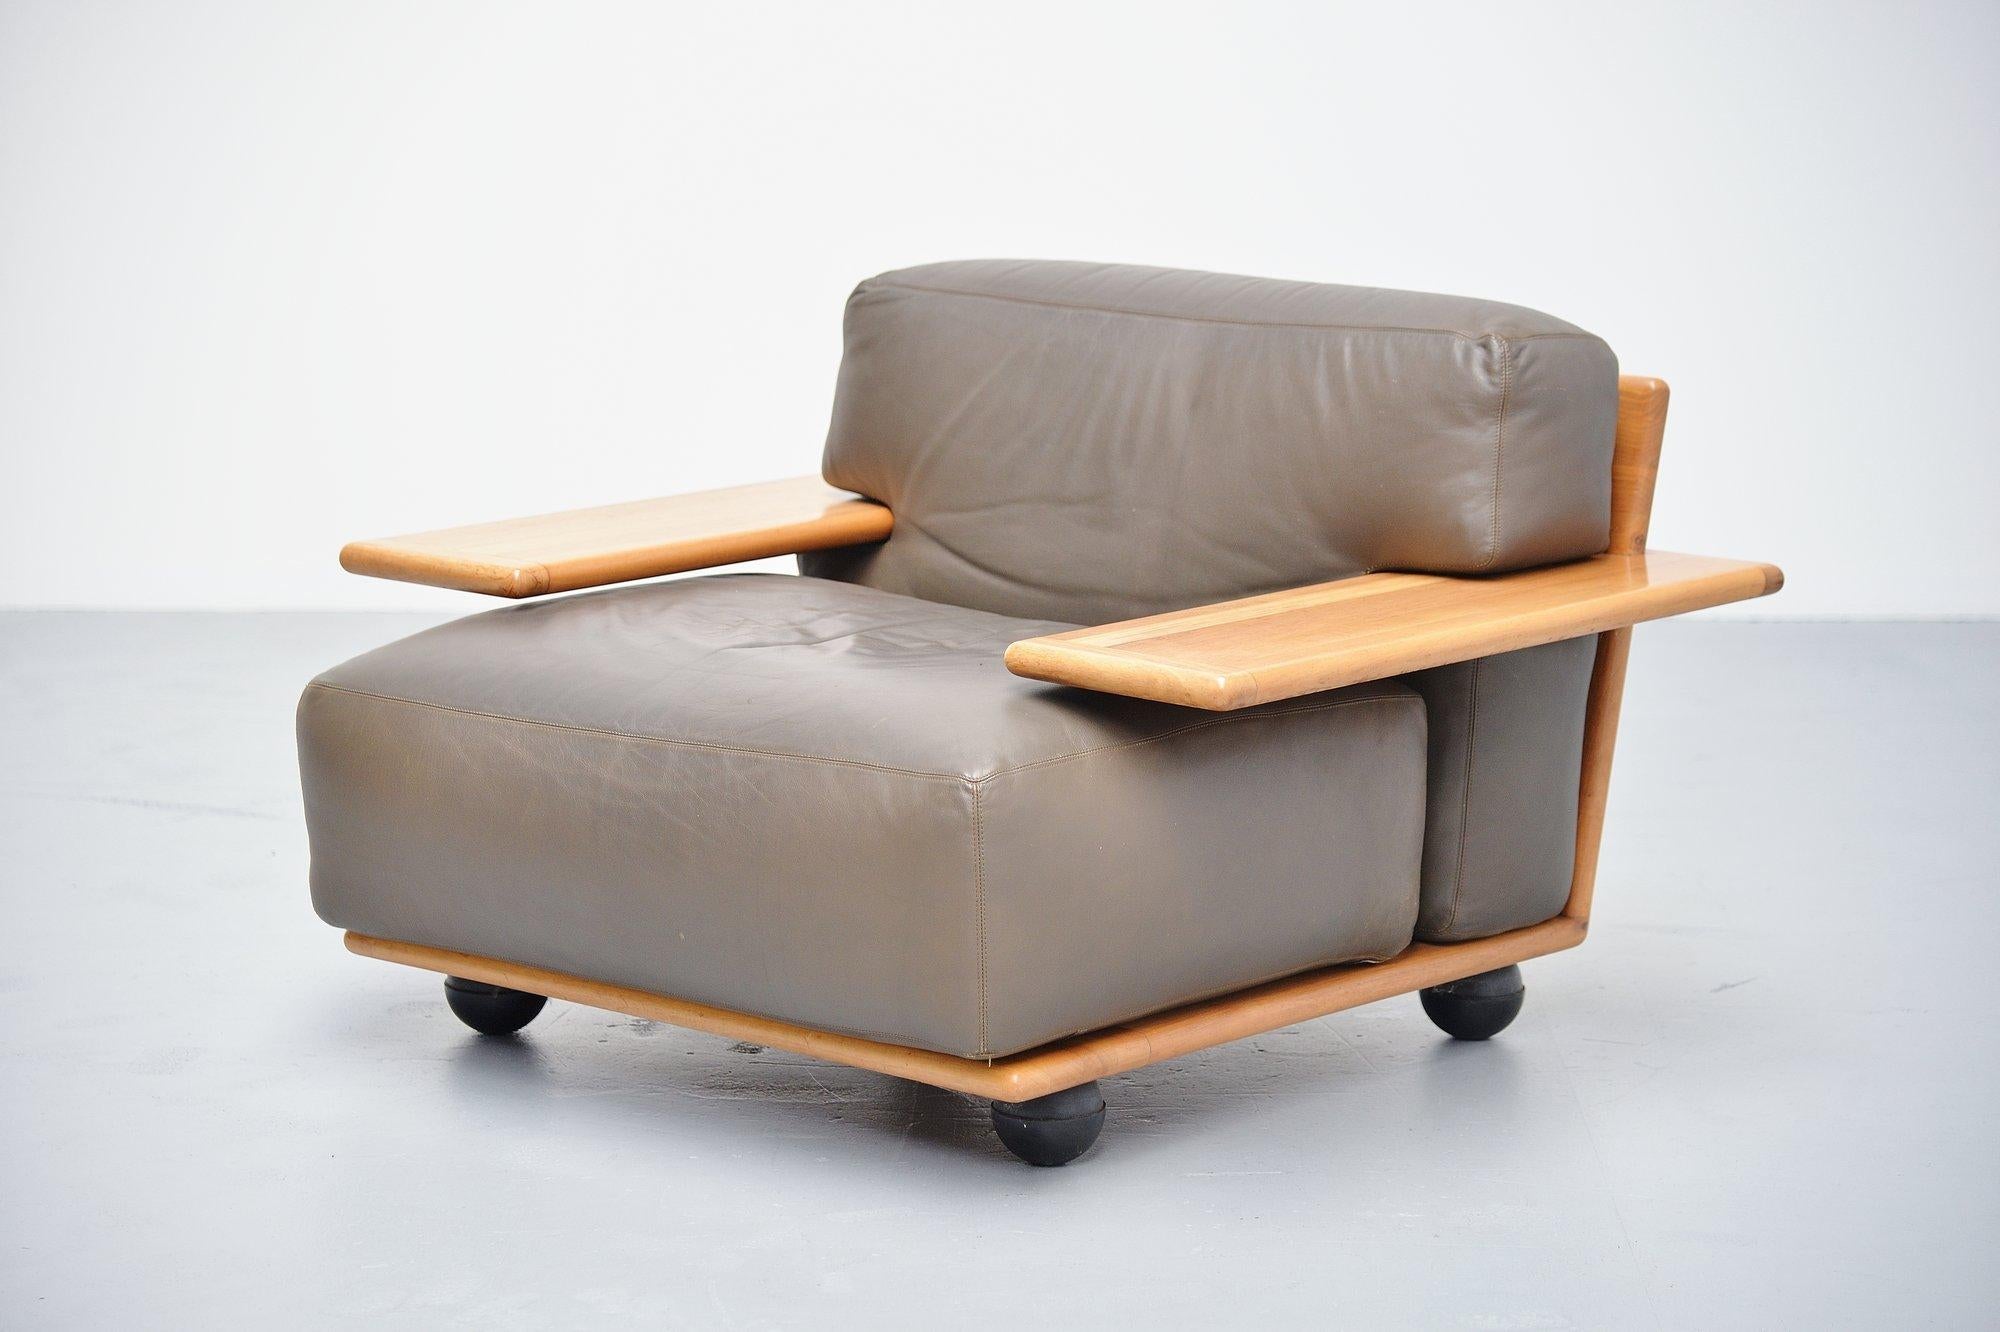 Fantastic low lounge chair designed by Mario Bellini and manufactured by Cassina, Italy 1971. This chair is from the Pianura series and has a solid walnut wooden frame. The cushions are made of dark olive green leather and have a very nice patina